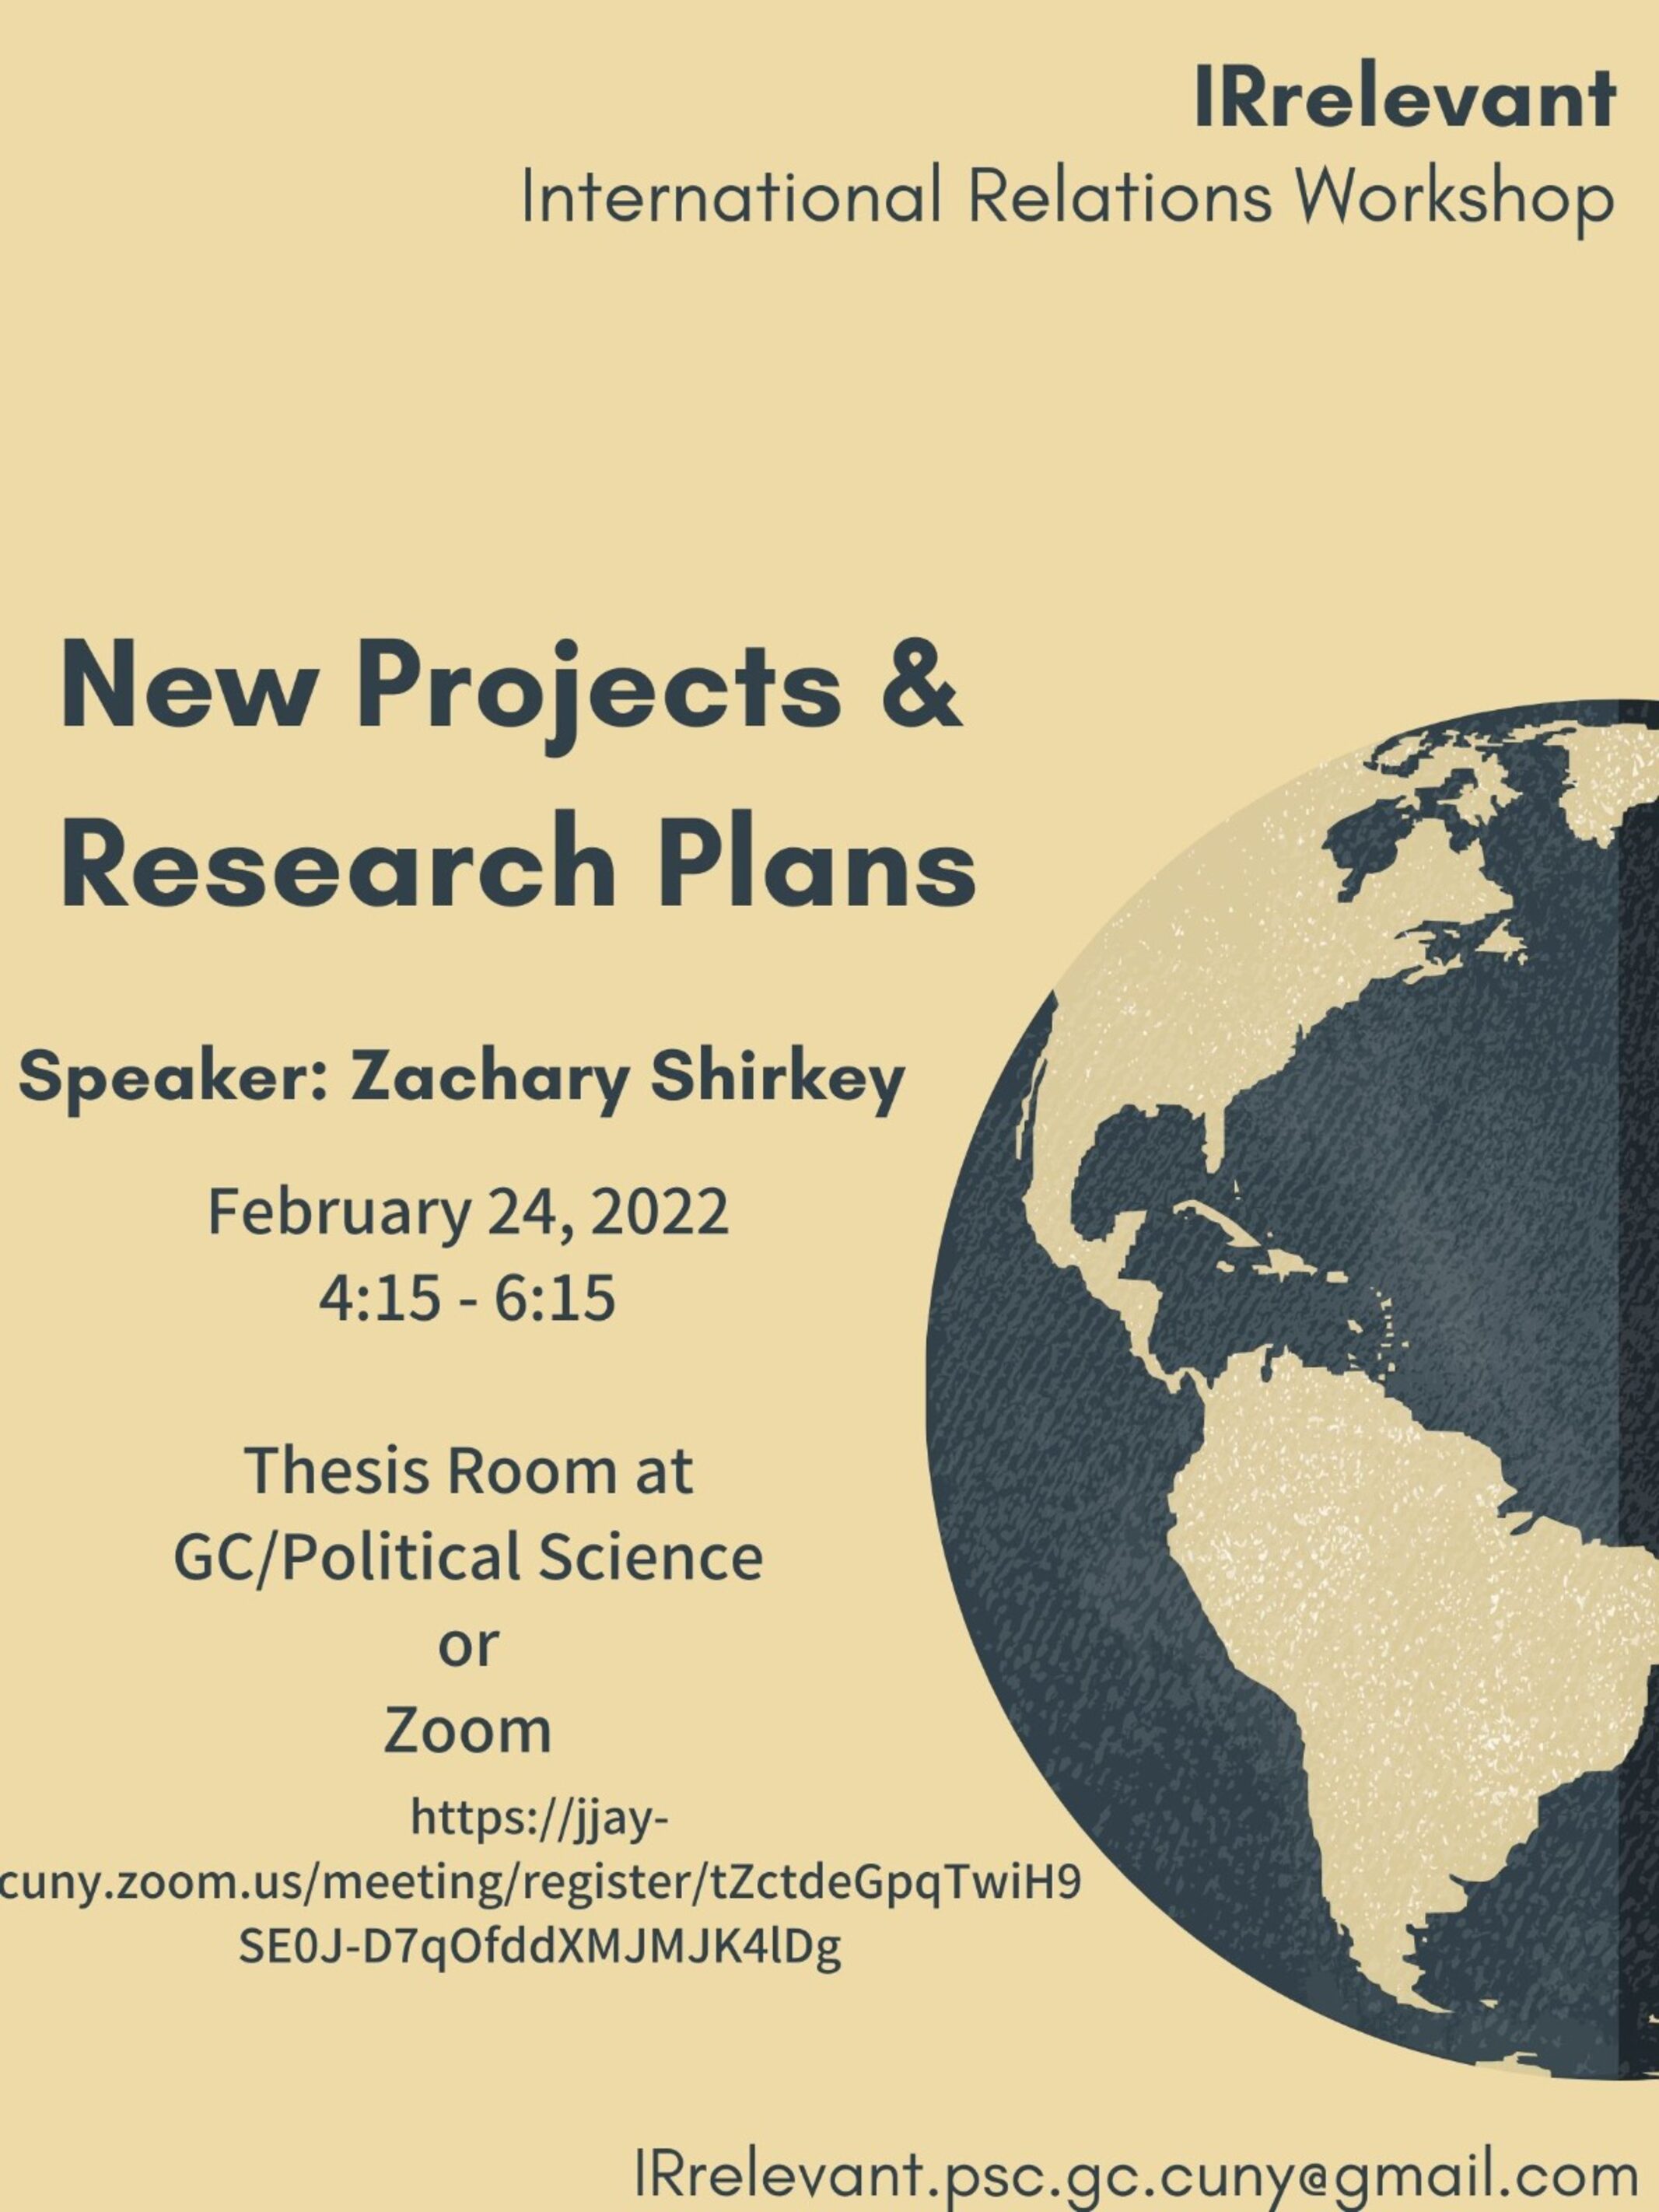 International Relations Workshop: New Projects and Research Plans with Prof. Zachary Shirkey, Thursday, February 24, 4:15-6:15pm